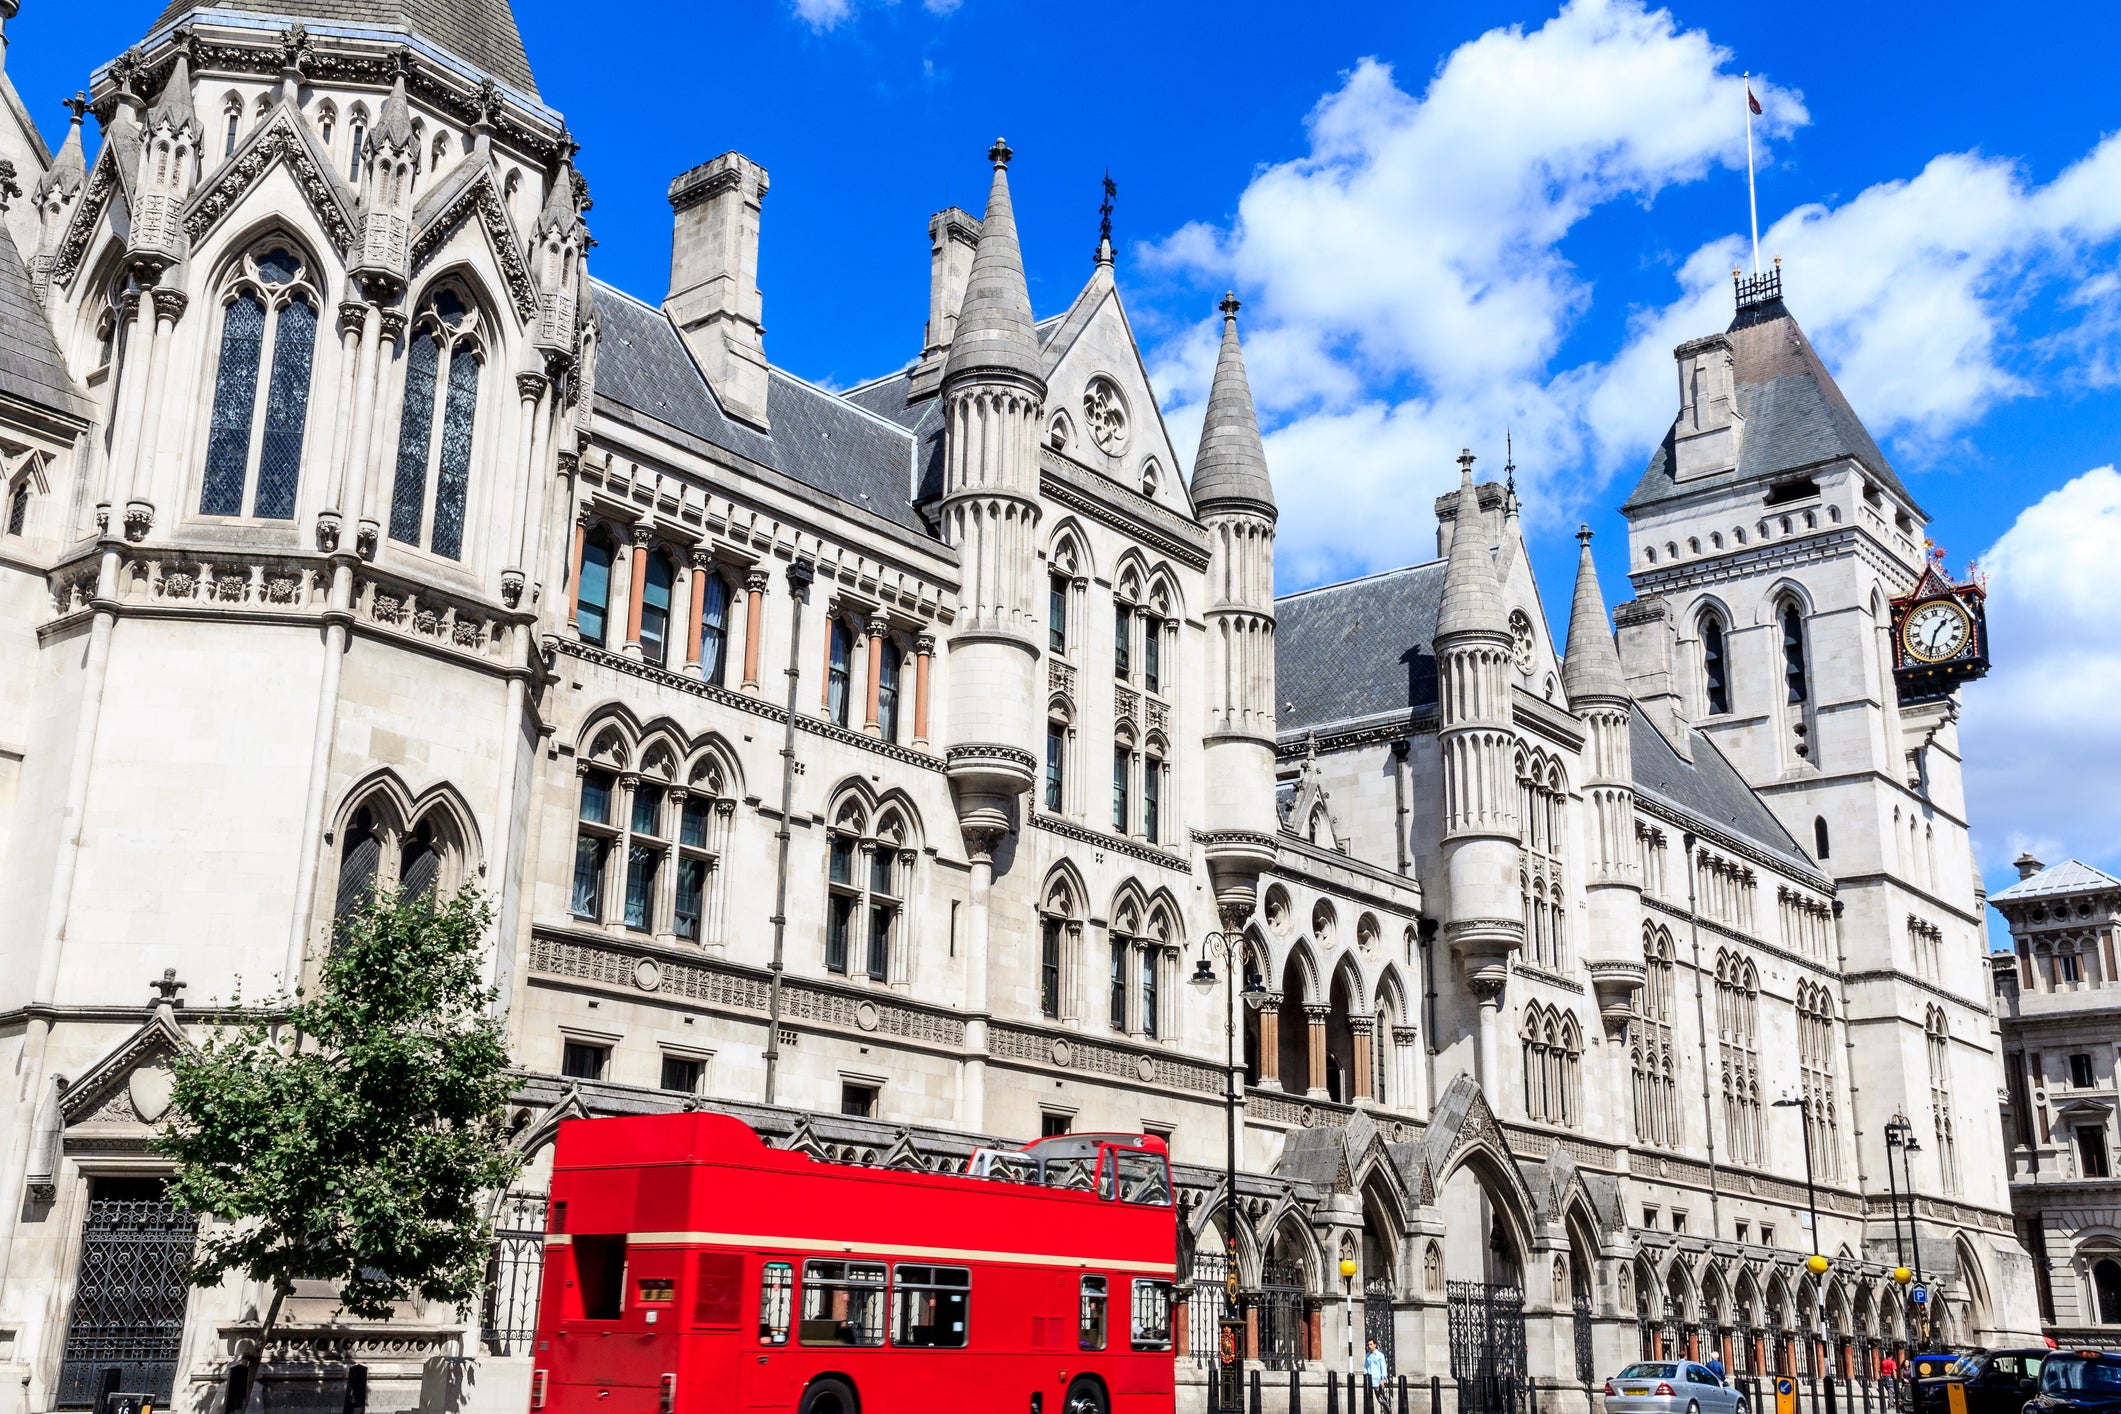 Mark Darcy’s legal work takes him to the Royal Courts of Justice